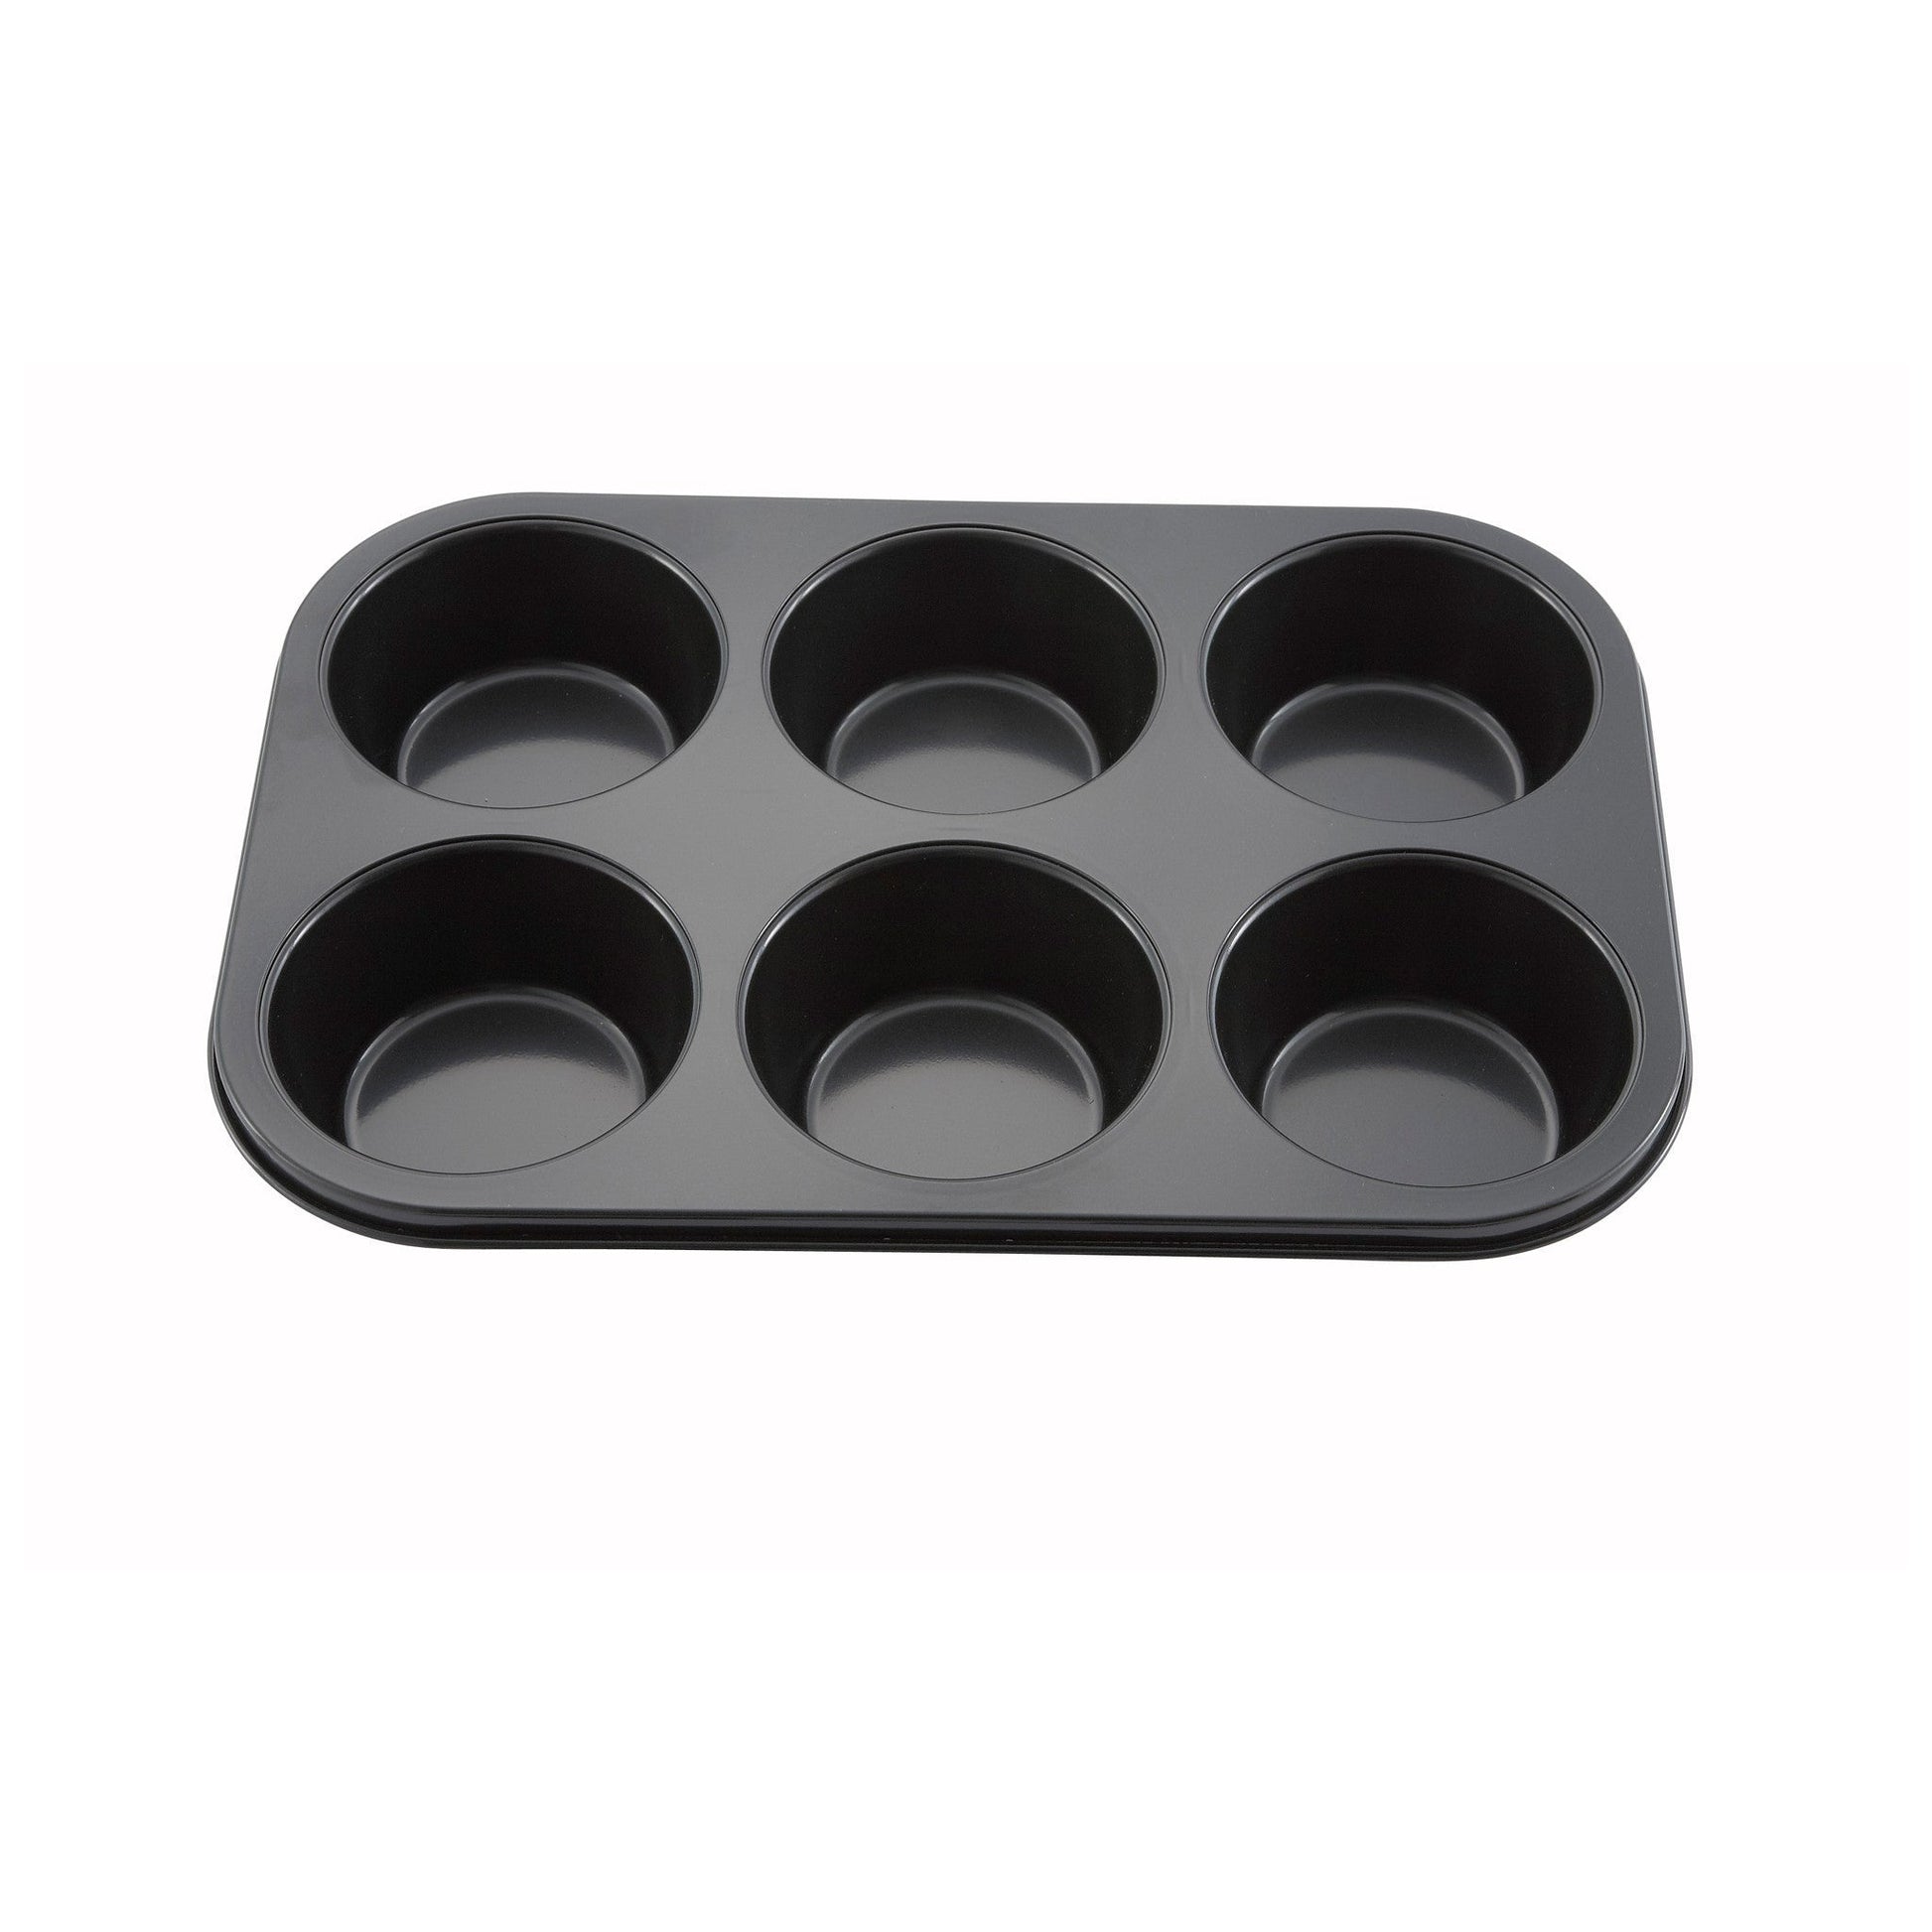 Carbon Steel Fry Pan - Non-Stick - Round - Black - 12 - 1 Count Box